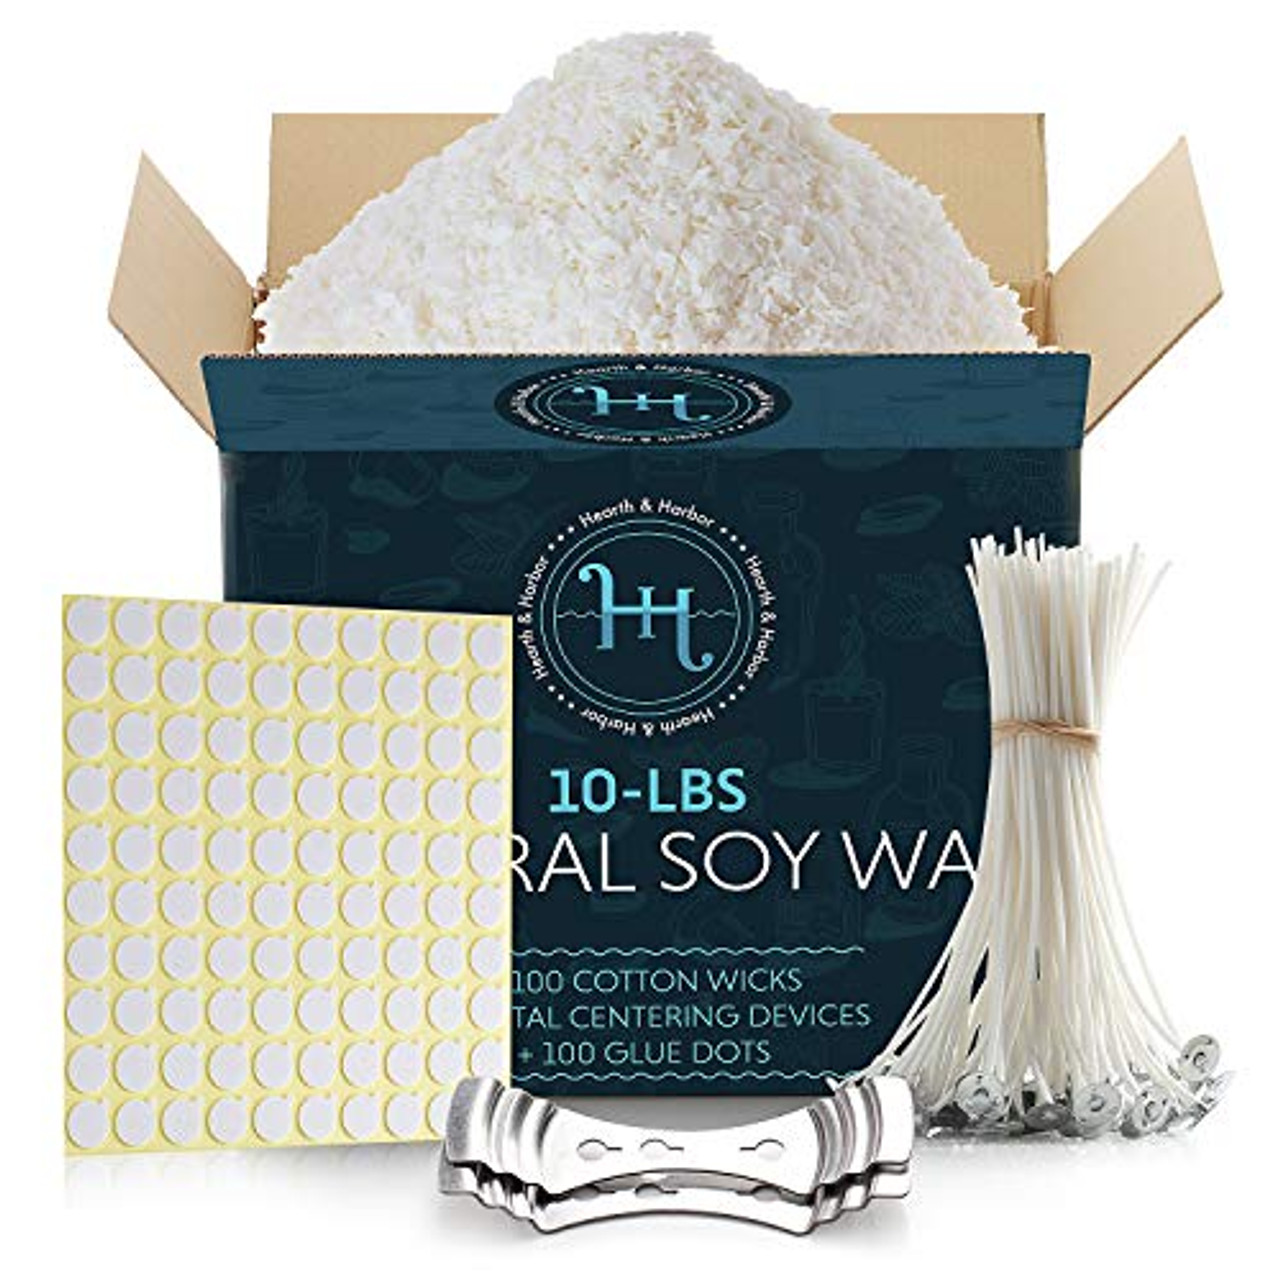 Pavlova Smash- Luxury Candle Making Kit, Make 6 Candles with Natural Soy Wax  A-Z Candle Making Set, Ceramic Cups, Dried Flowers, Gift Packing for Each  Candle, 2 Fragrances - Arts and Crafts DIY Kit